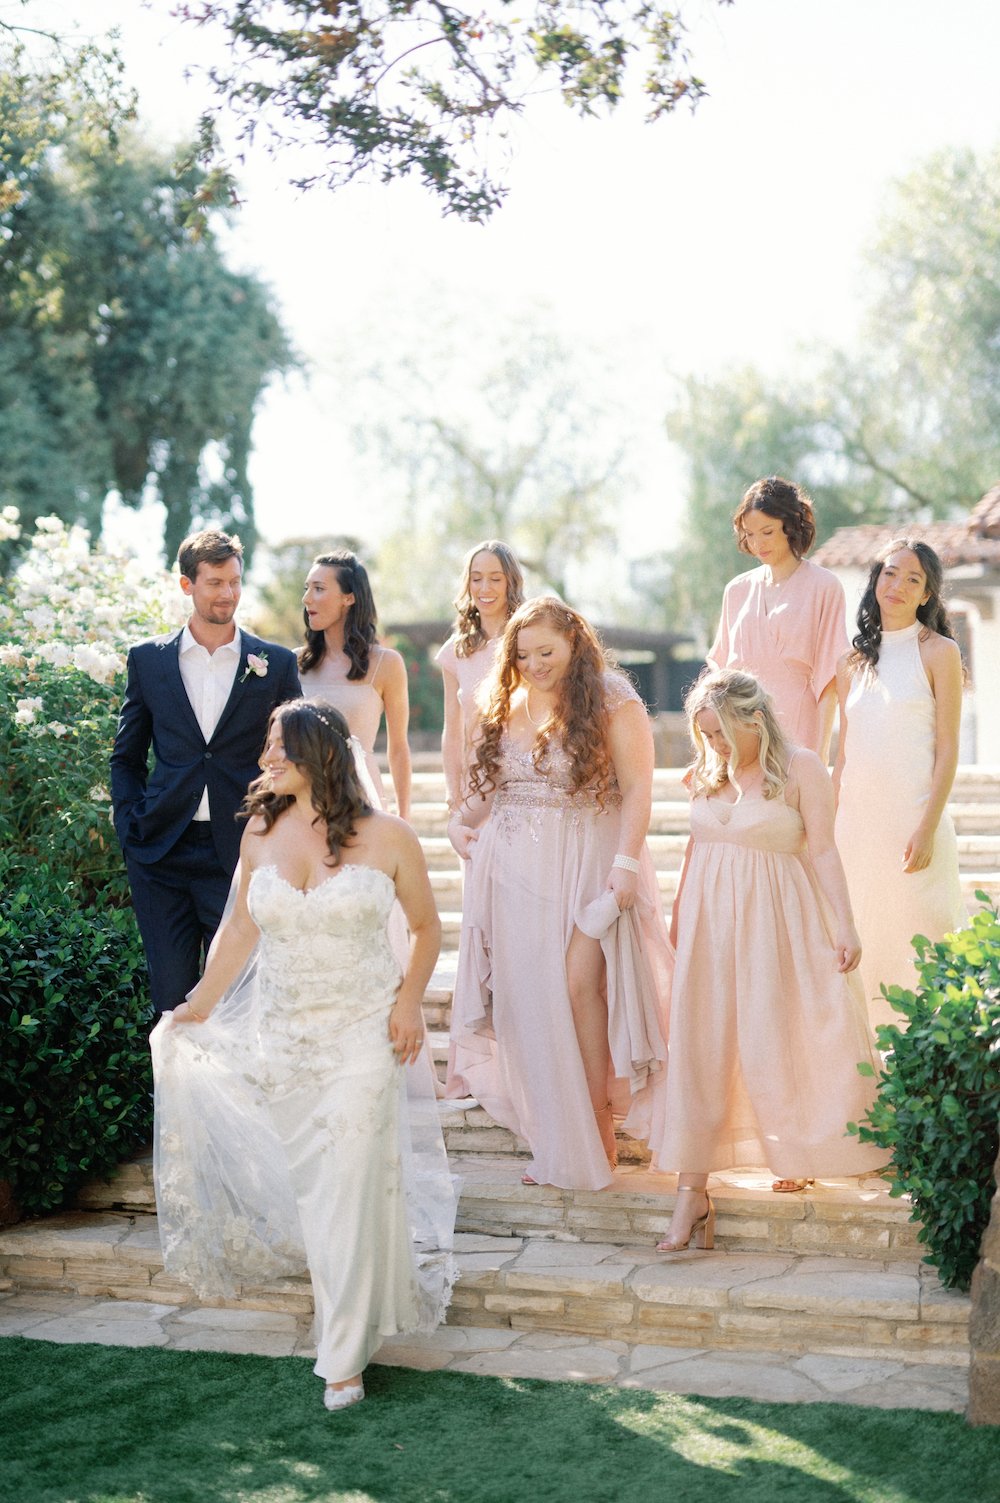  Light and airy wedding photography bridal party portrait. 